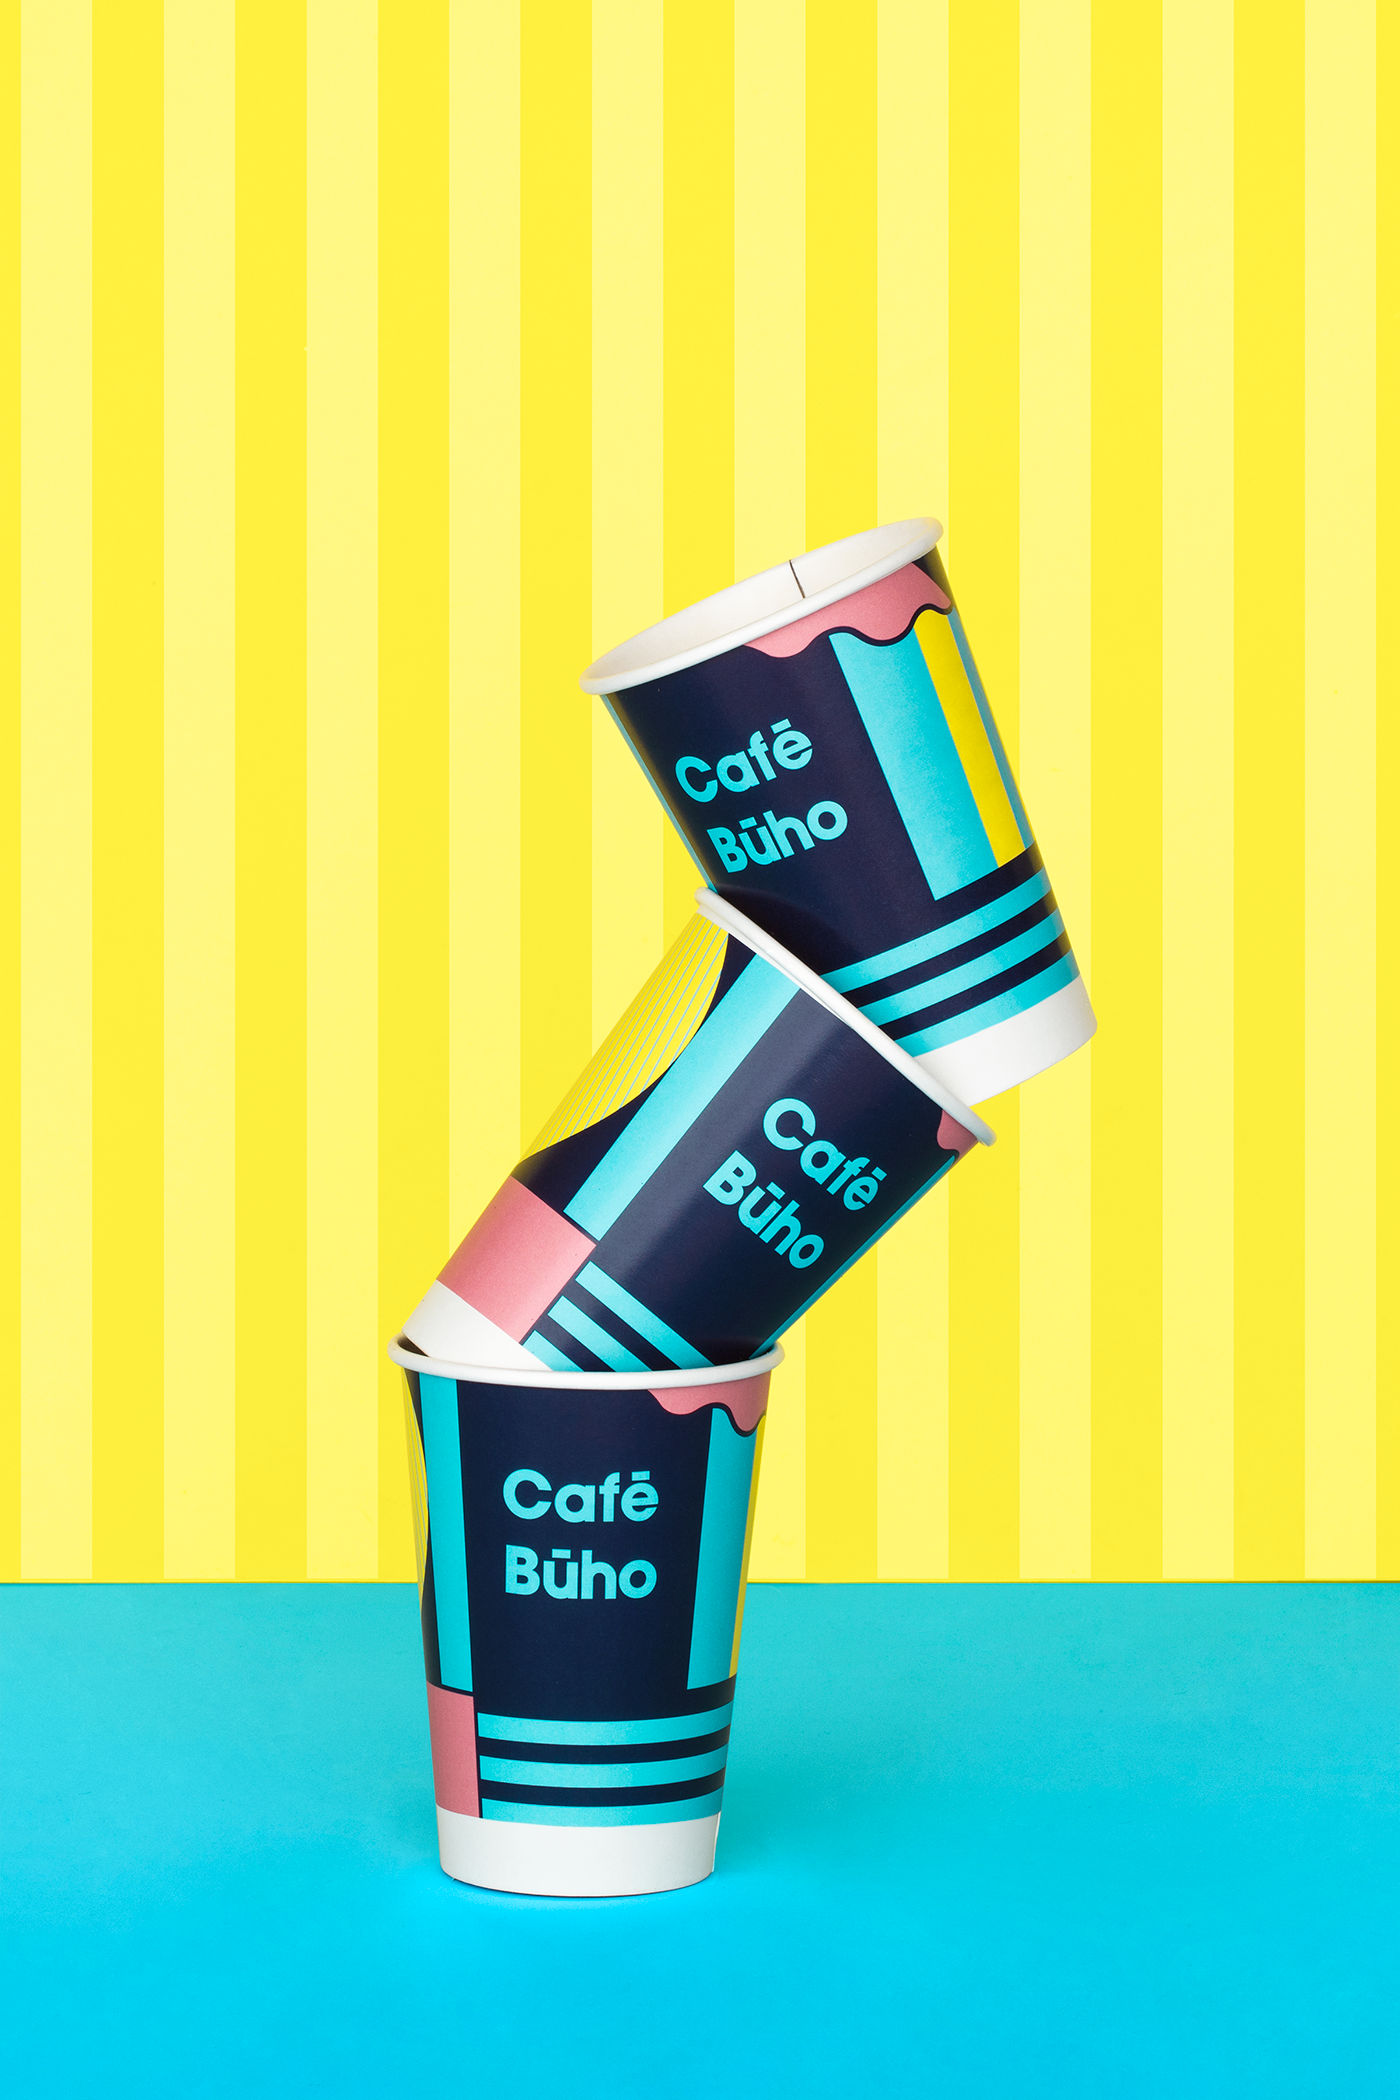 byFutura Futura cafe buho cafe chile branding  colorful ILLUSTRATION  Packaging